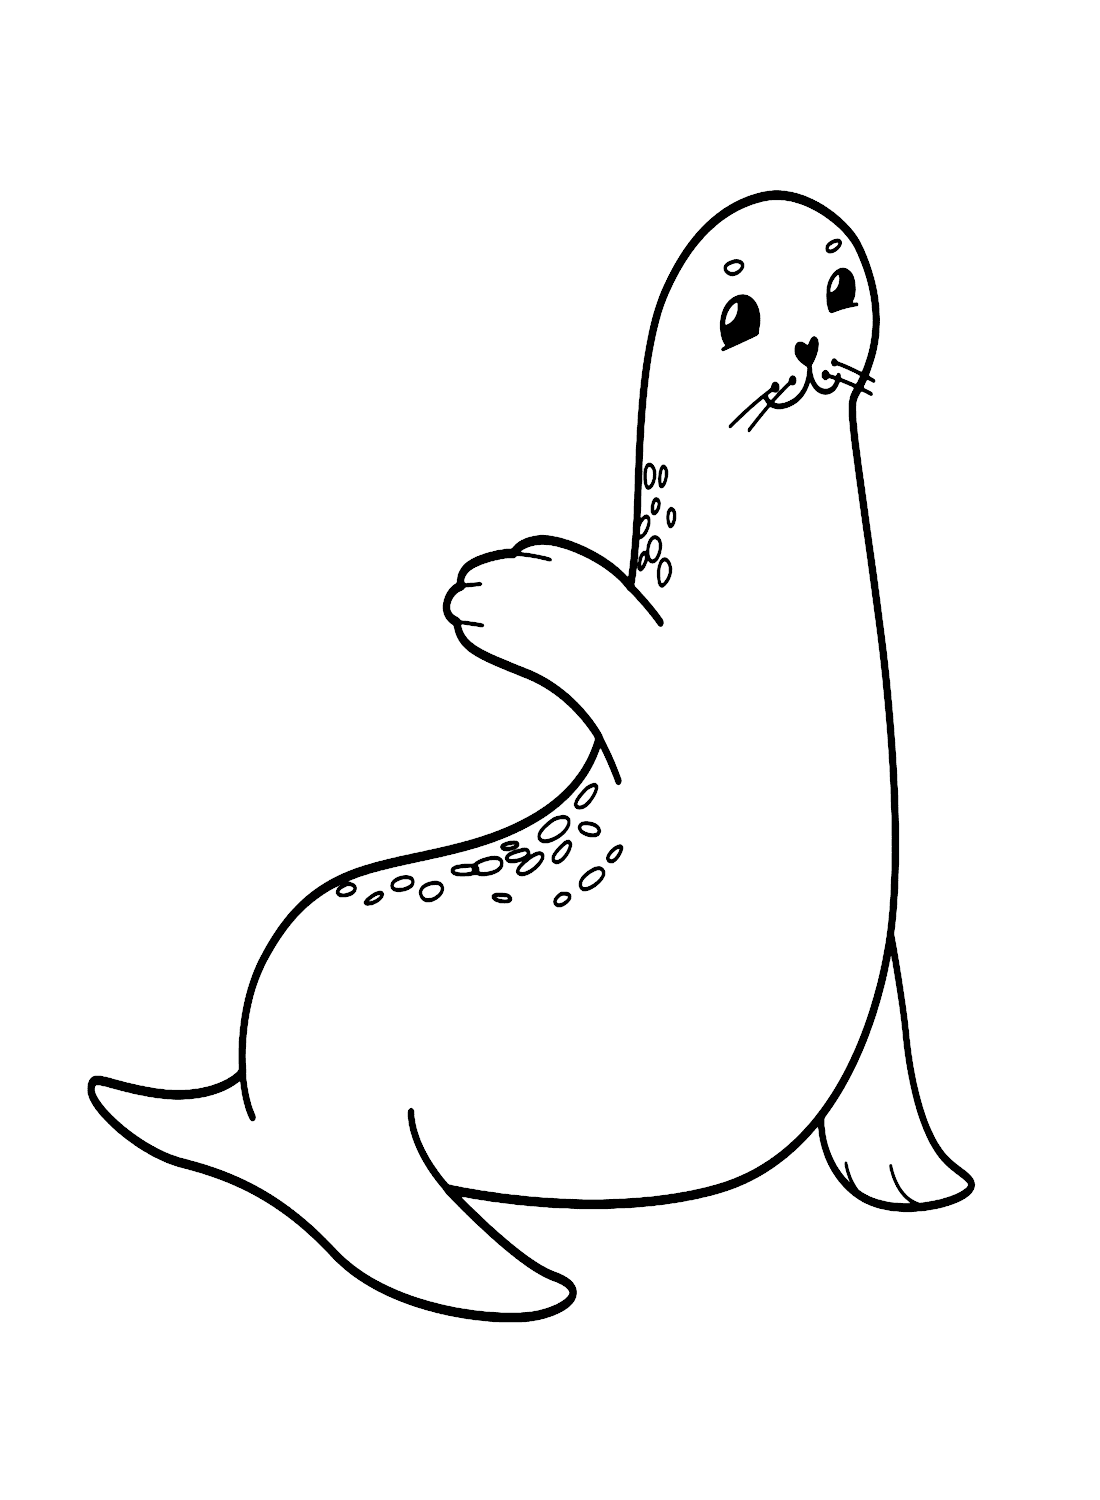 Cute Cartoon Sea Lion Coloring Page - Free Printable Coloring Pages